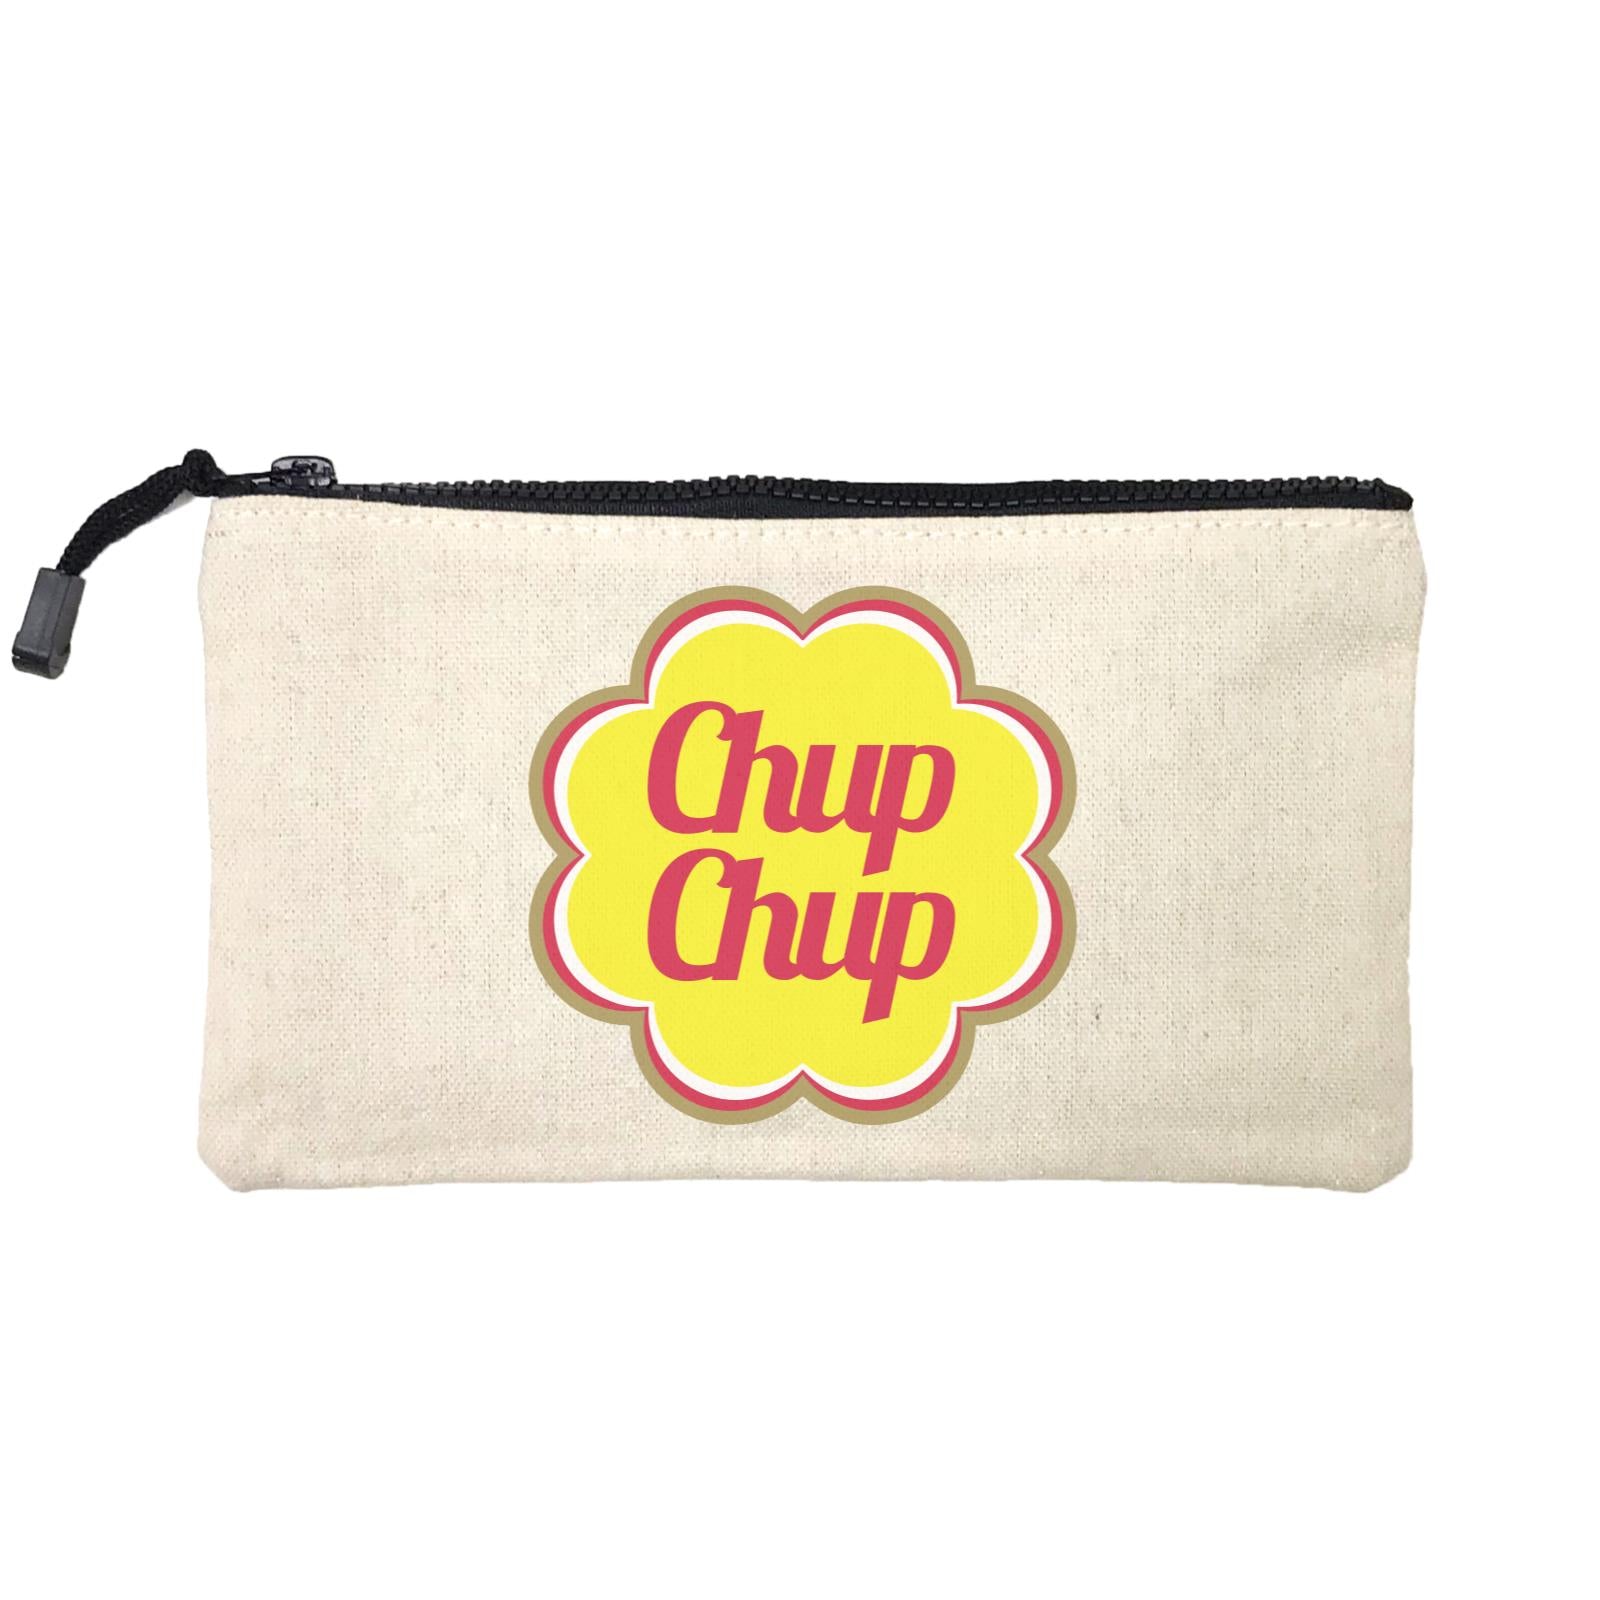 Slang Statement Chup Chup SP Stationery Pouch